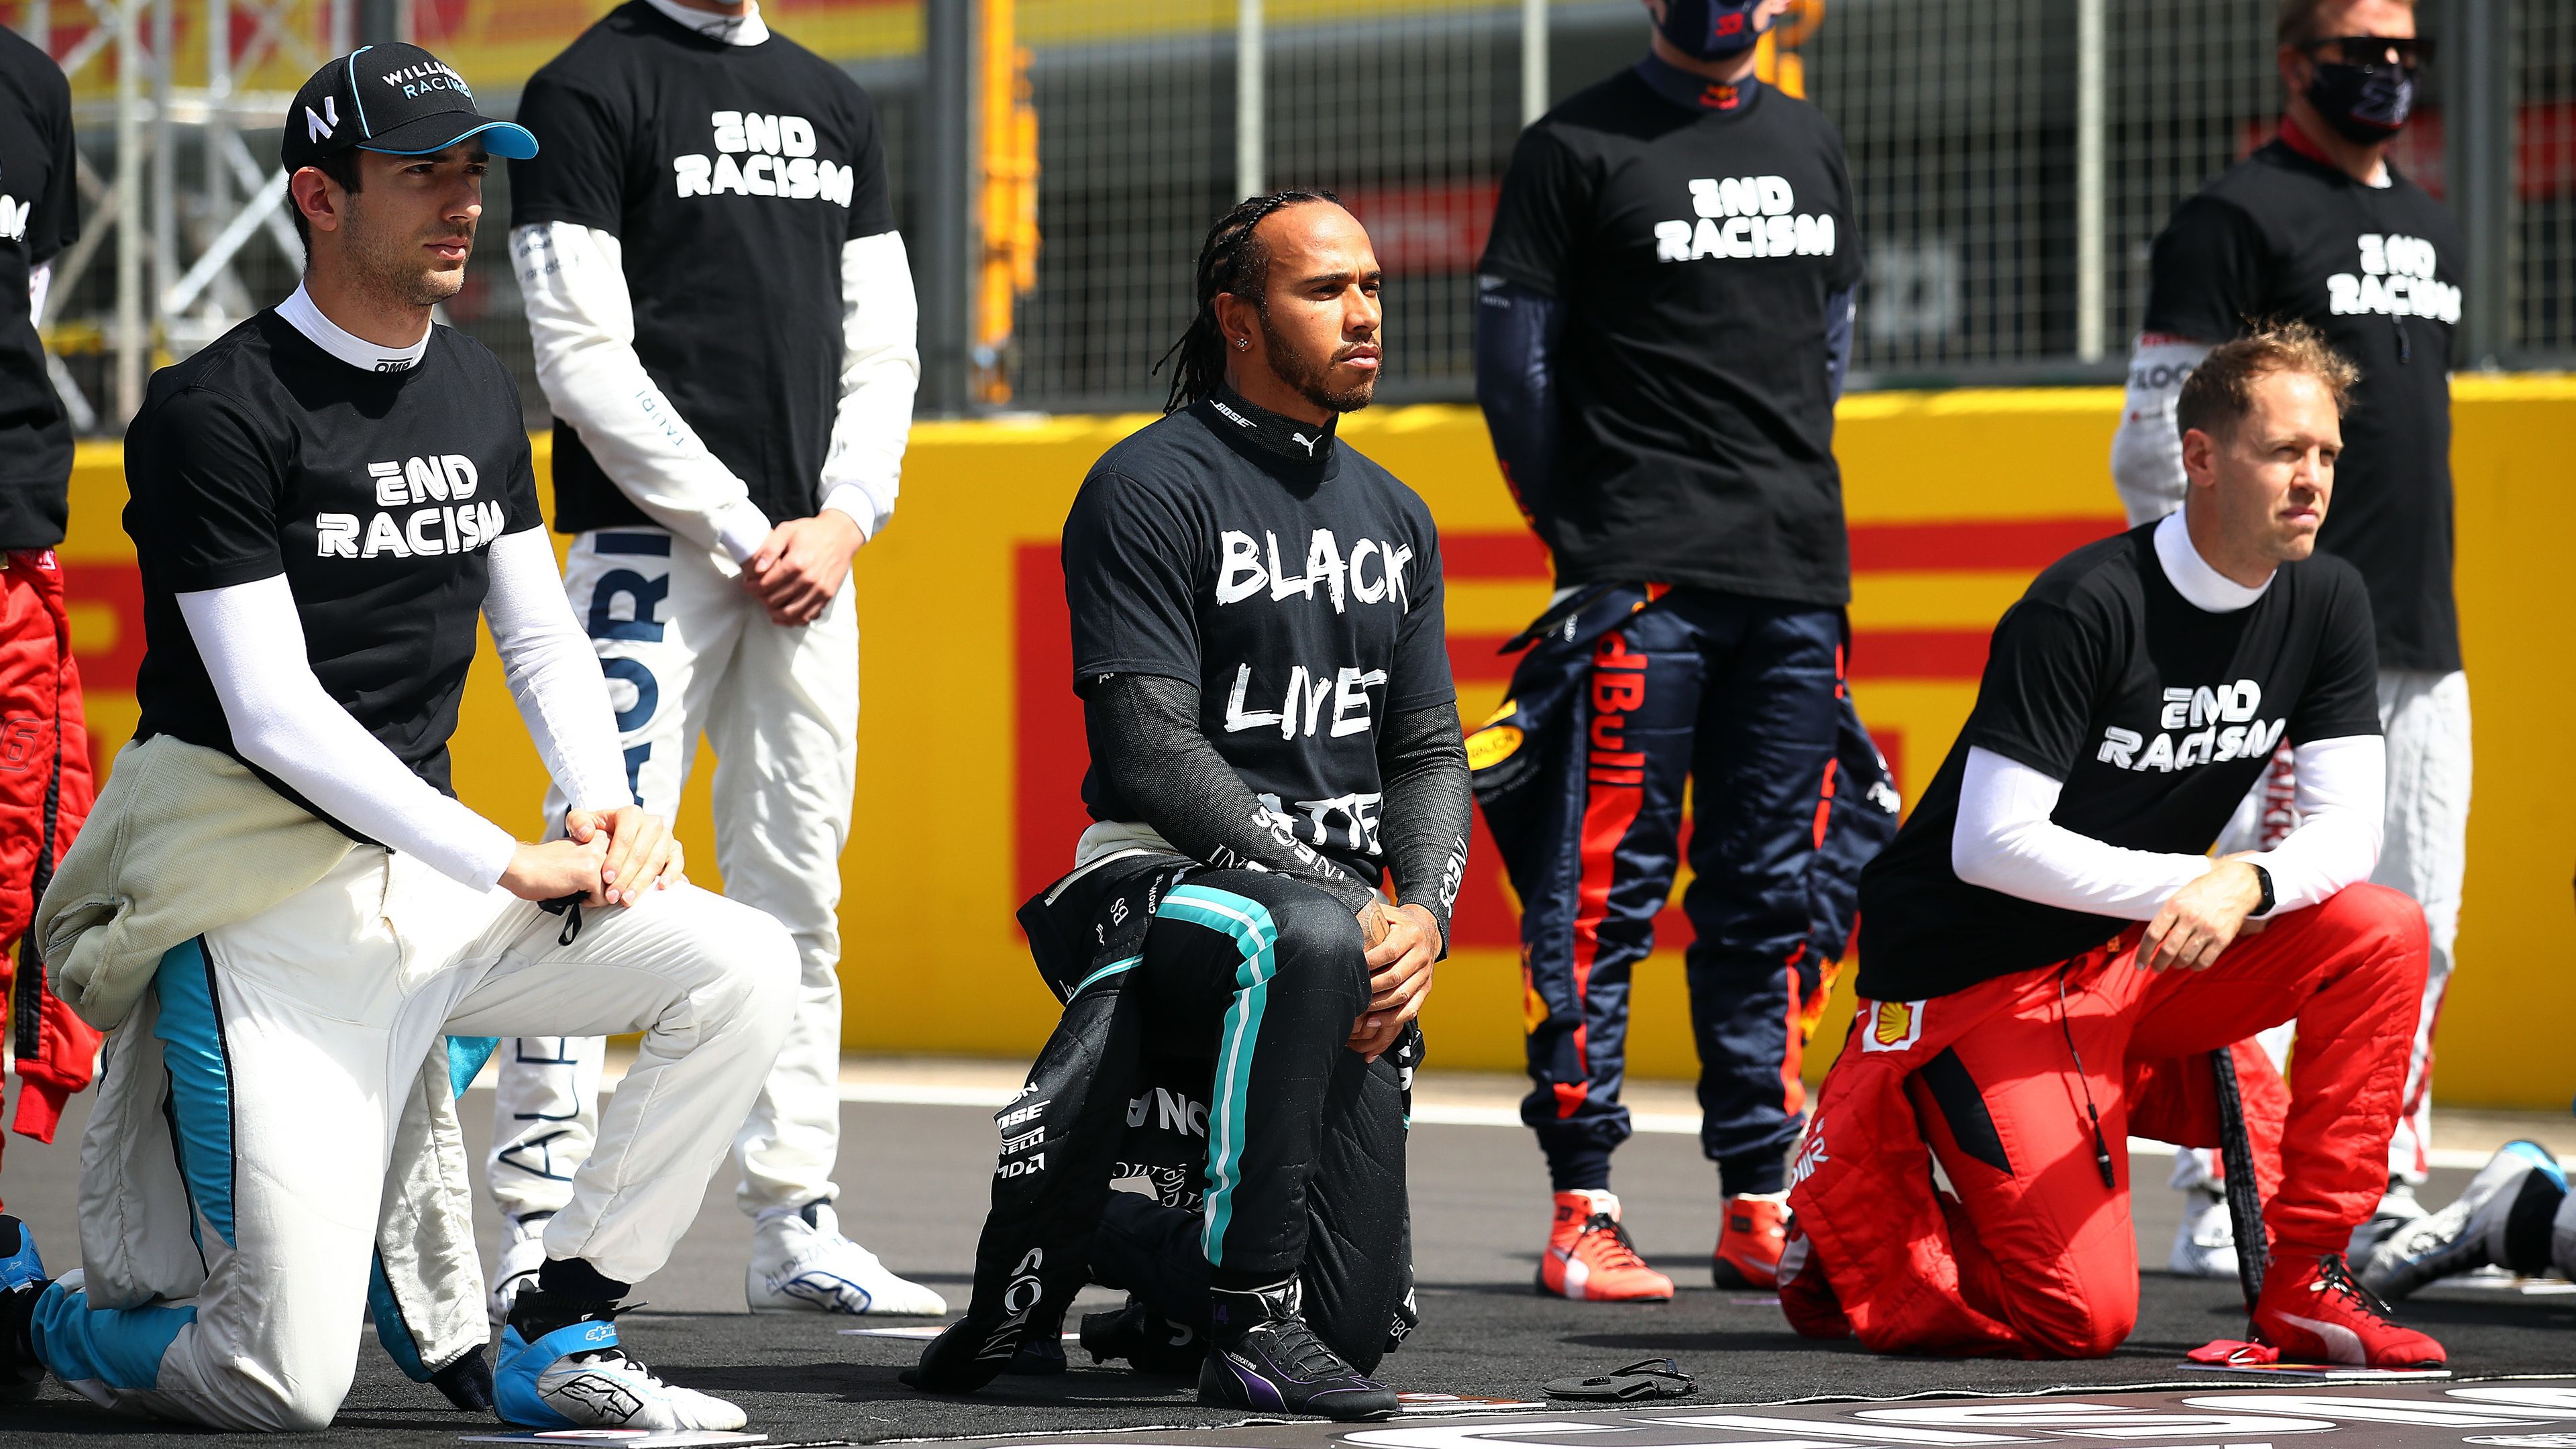 Lewis Hamilton takes a knee on the grid in support of the Black Lives Matter movement prior to the British Grand Prix in 2020.